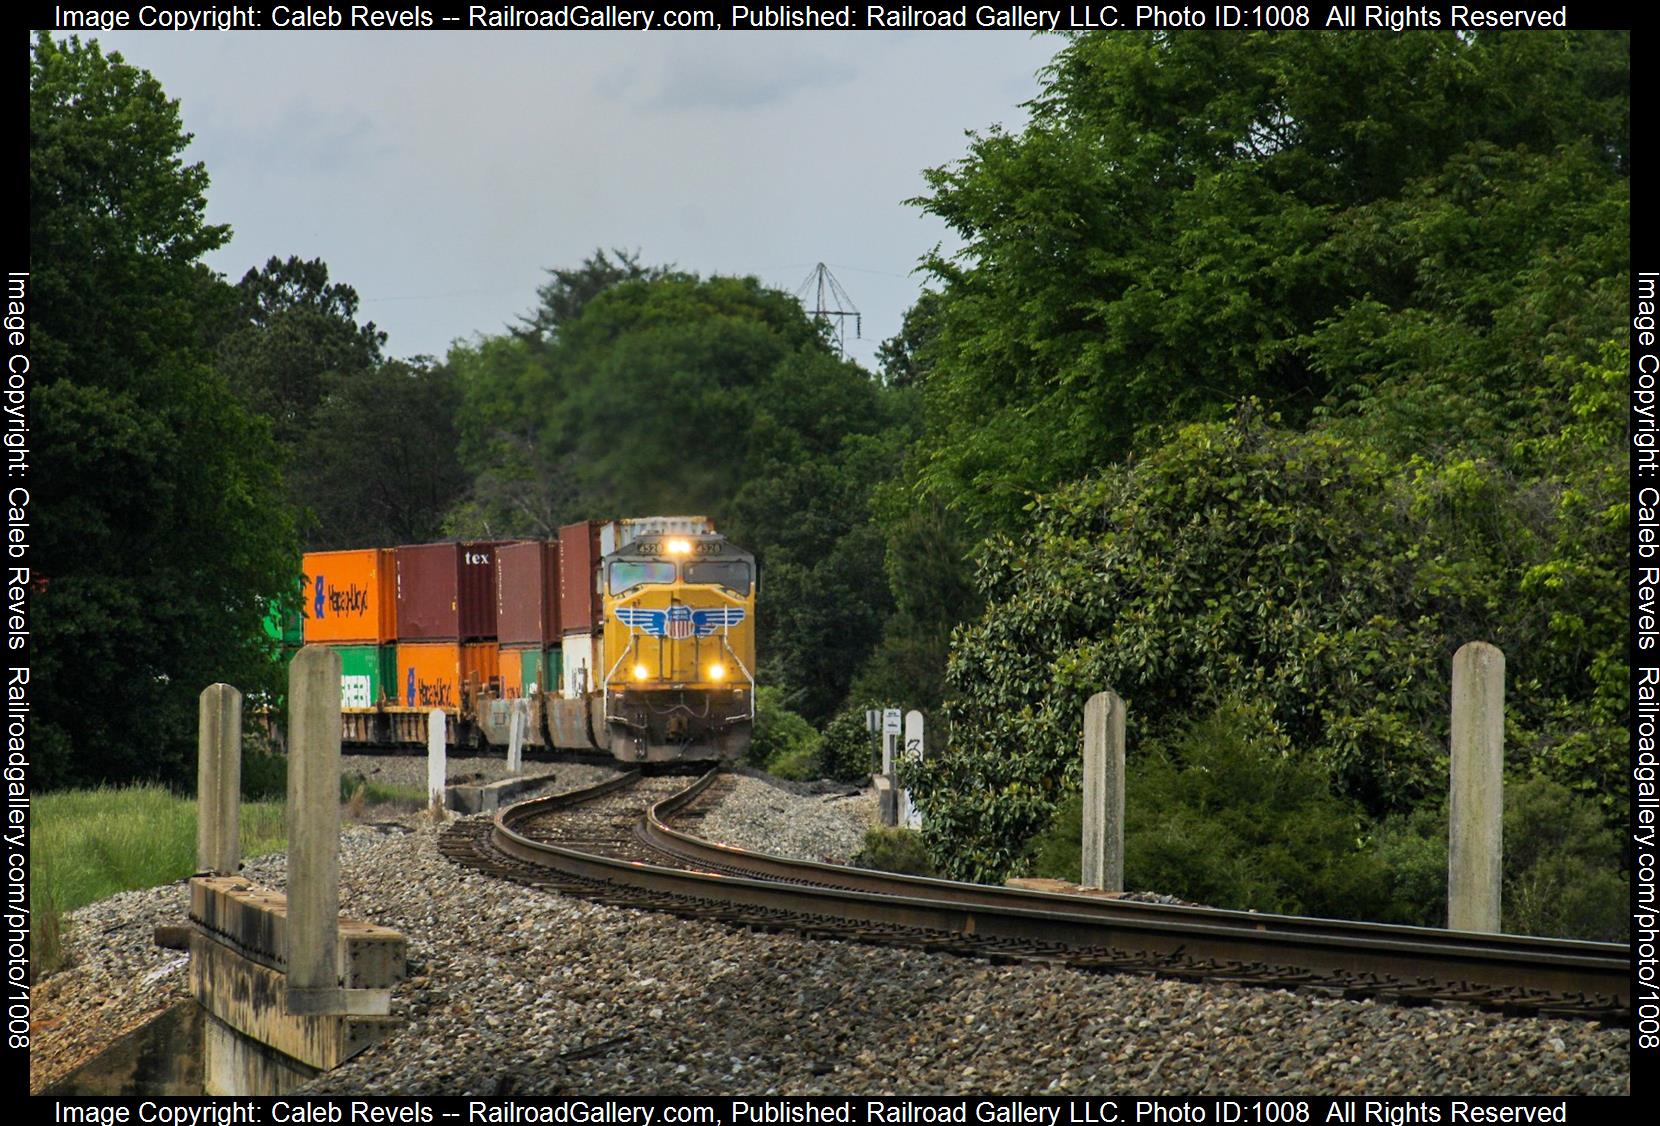 UP 4528 is a class EMD SD70M and  is pictured in Spartanburg, South Carolina, USA.  This was taken along the Norfolk Southern W Line  on the Norfolk Southern. Photo Copyright: Caleb Revels uploaded to Railroad Gallery on 04/29/2023. This photograph of UP 4528 was taken on Saturday, April 29, 2023. All Rights Reserved. 